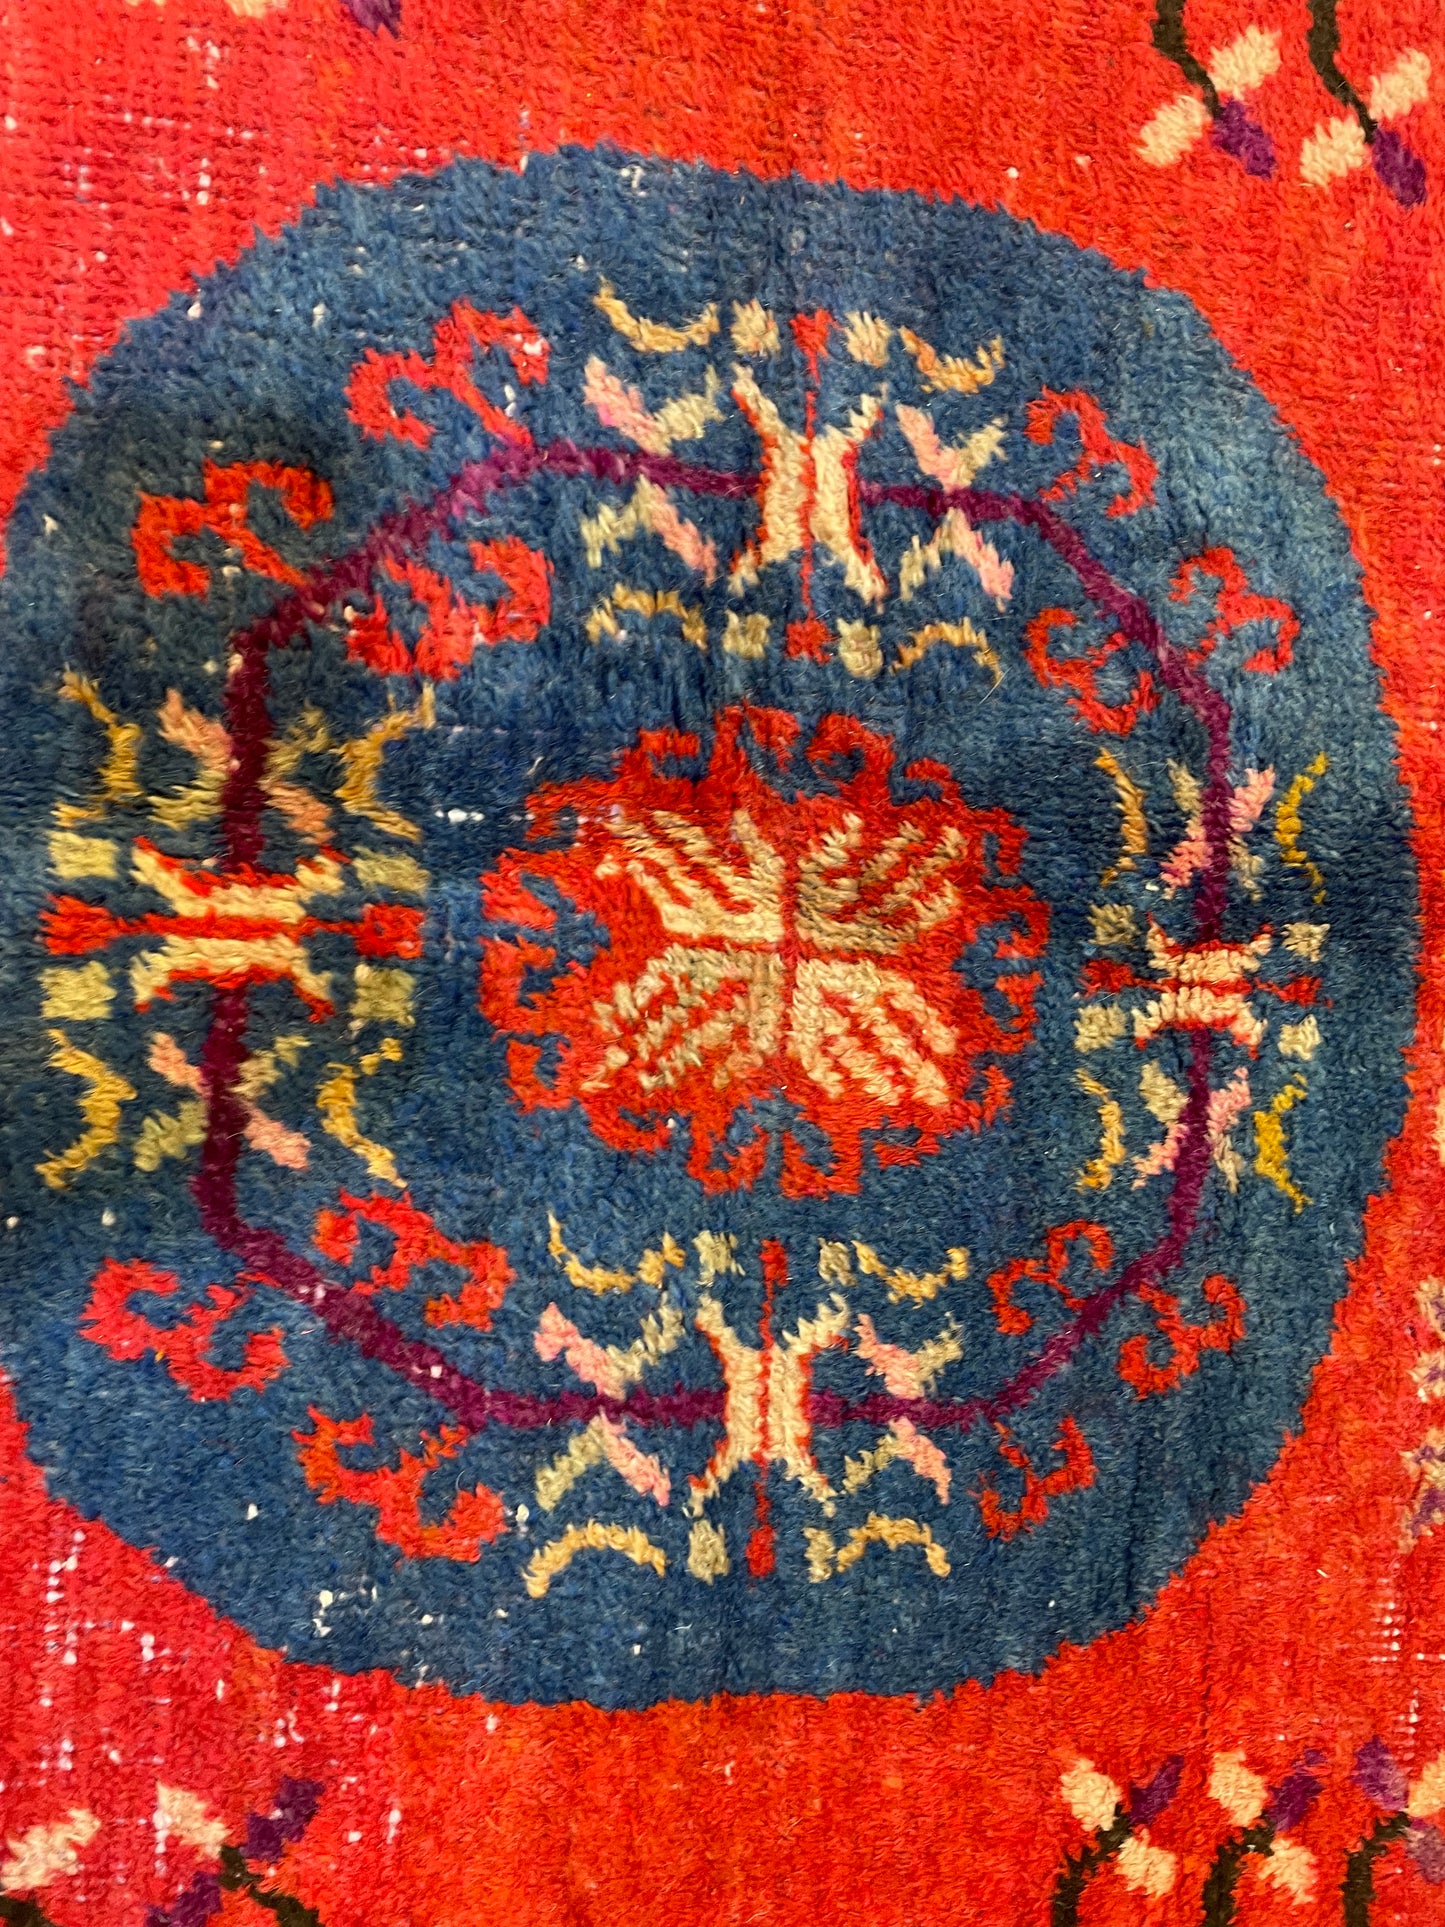 Antique Hand-Knotted Wool Area Rug Khotan Samarkand Collectible 4'4" x 9'5"